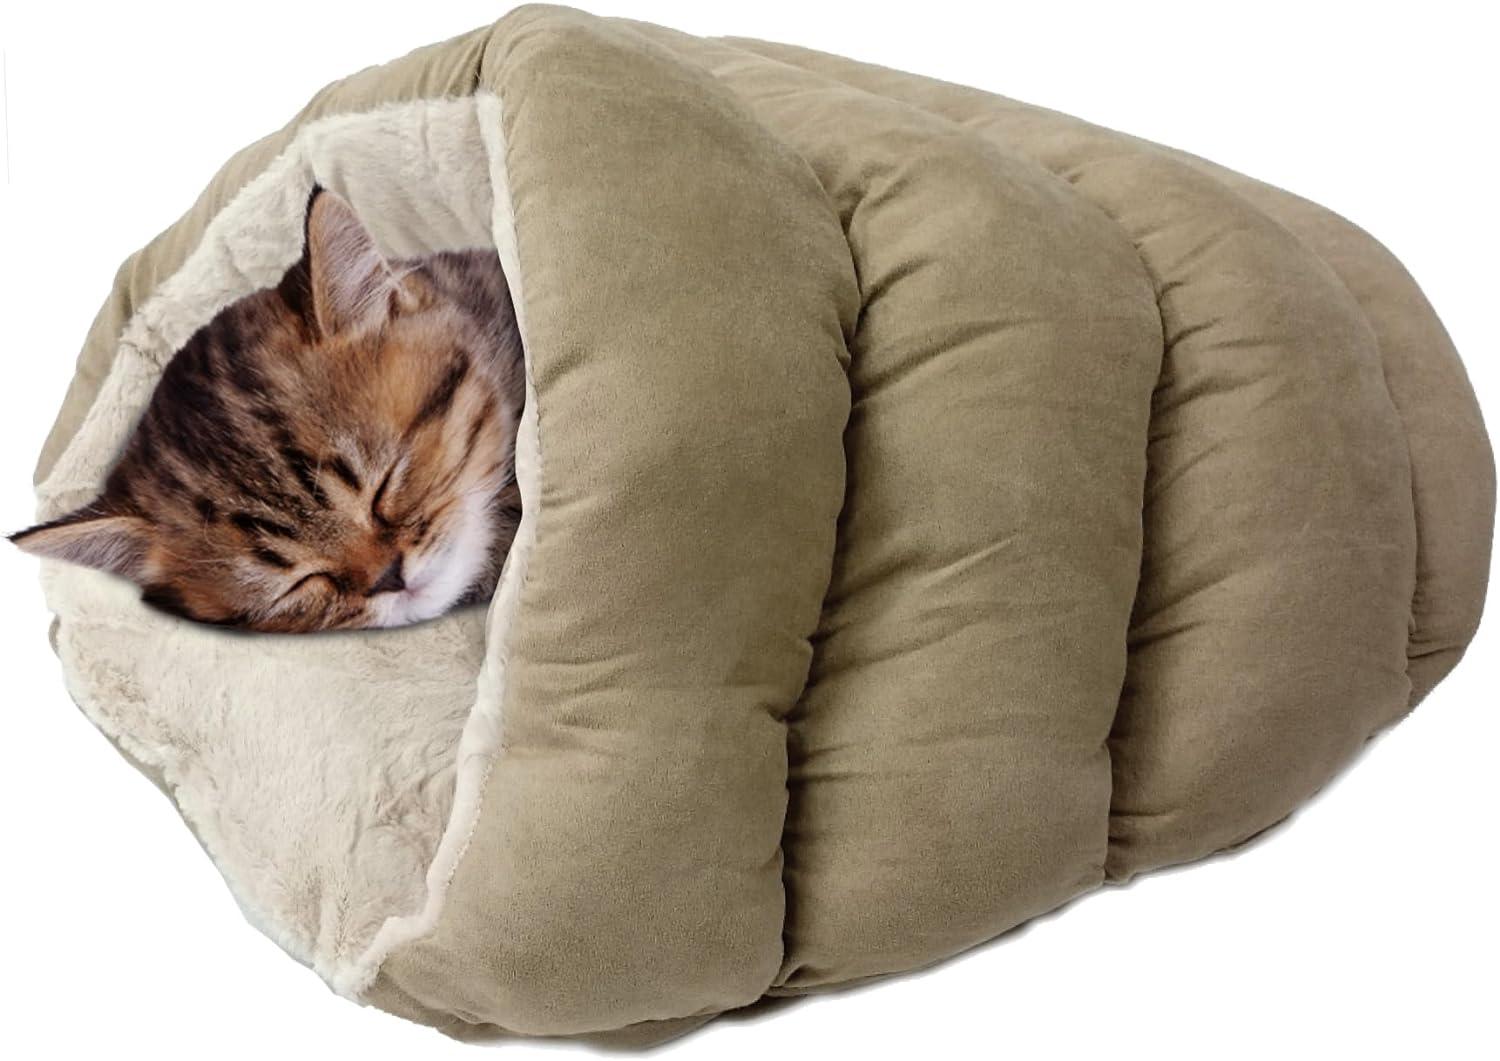 Spot Sleep Zone Cuddle Cave for Cats and Dogs for $14.99